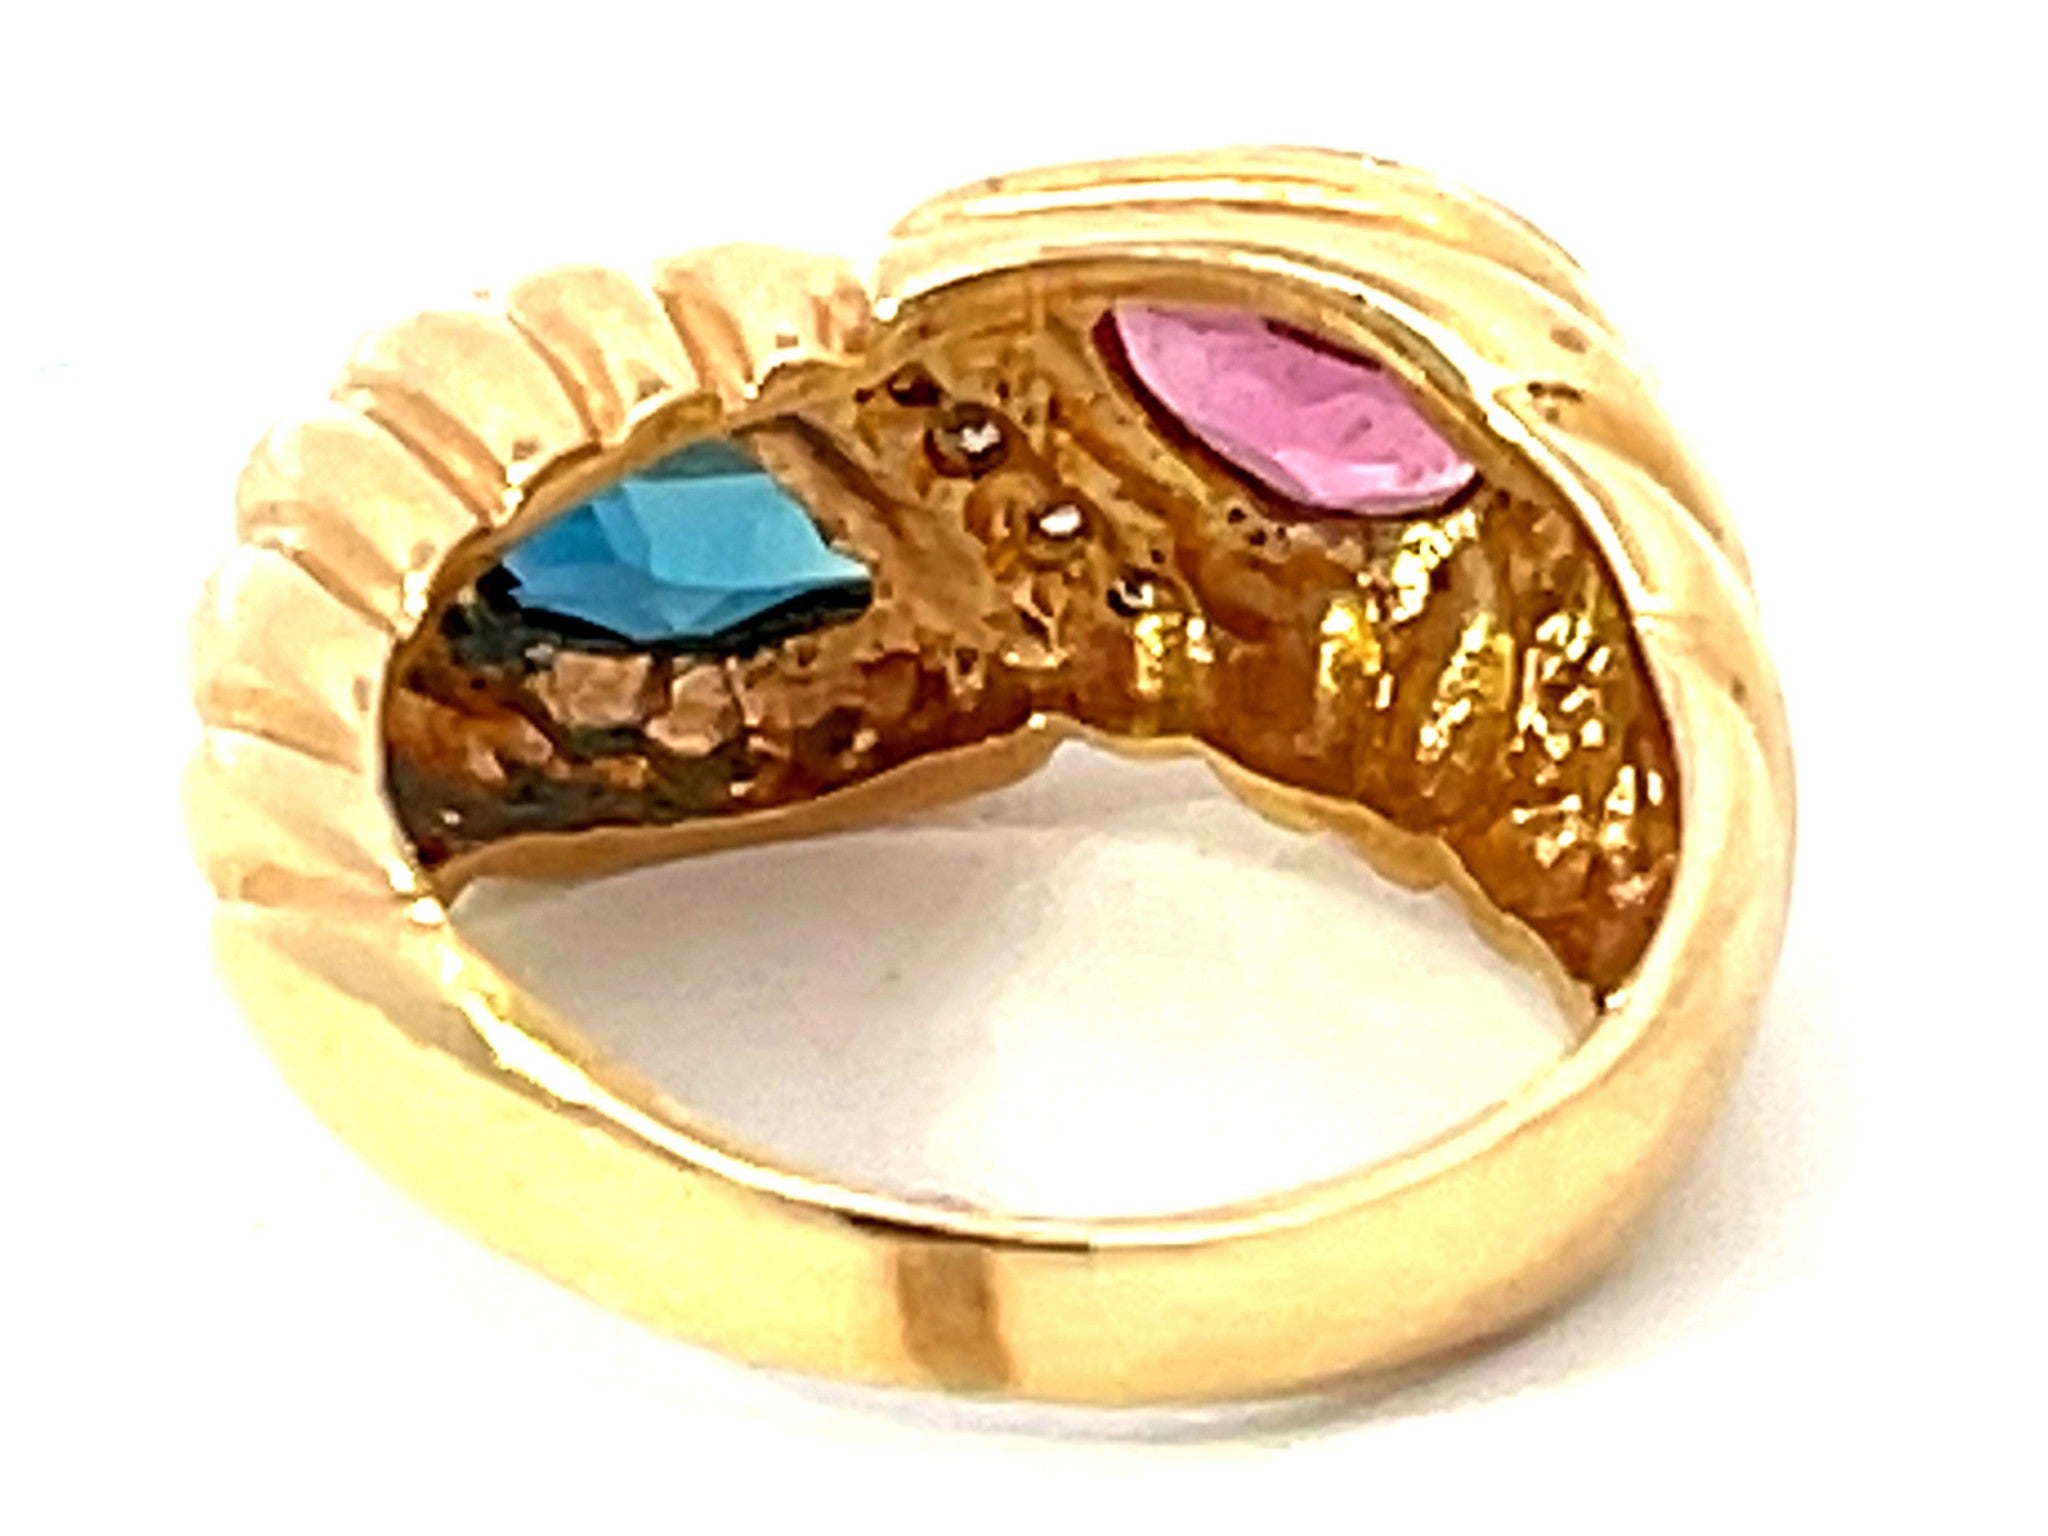 Pink and Indicolite Tourmaline Diamond Ring in 14k Yellow Gold